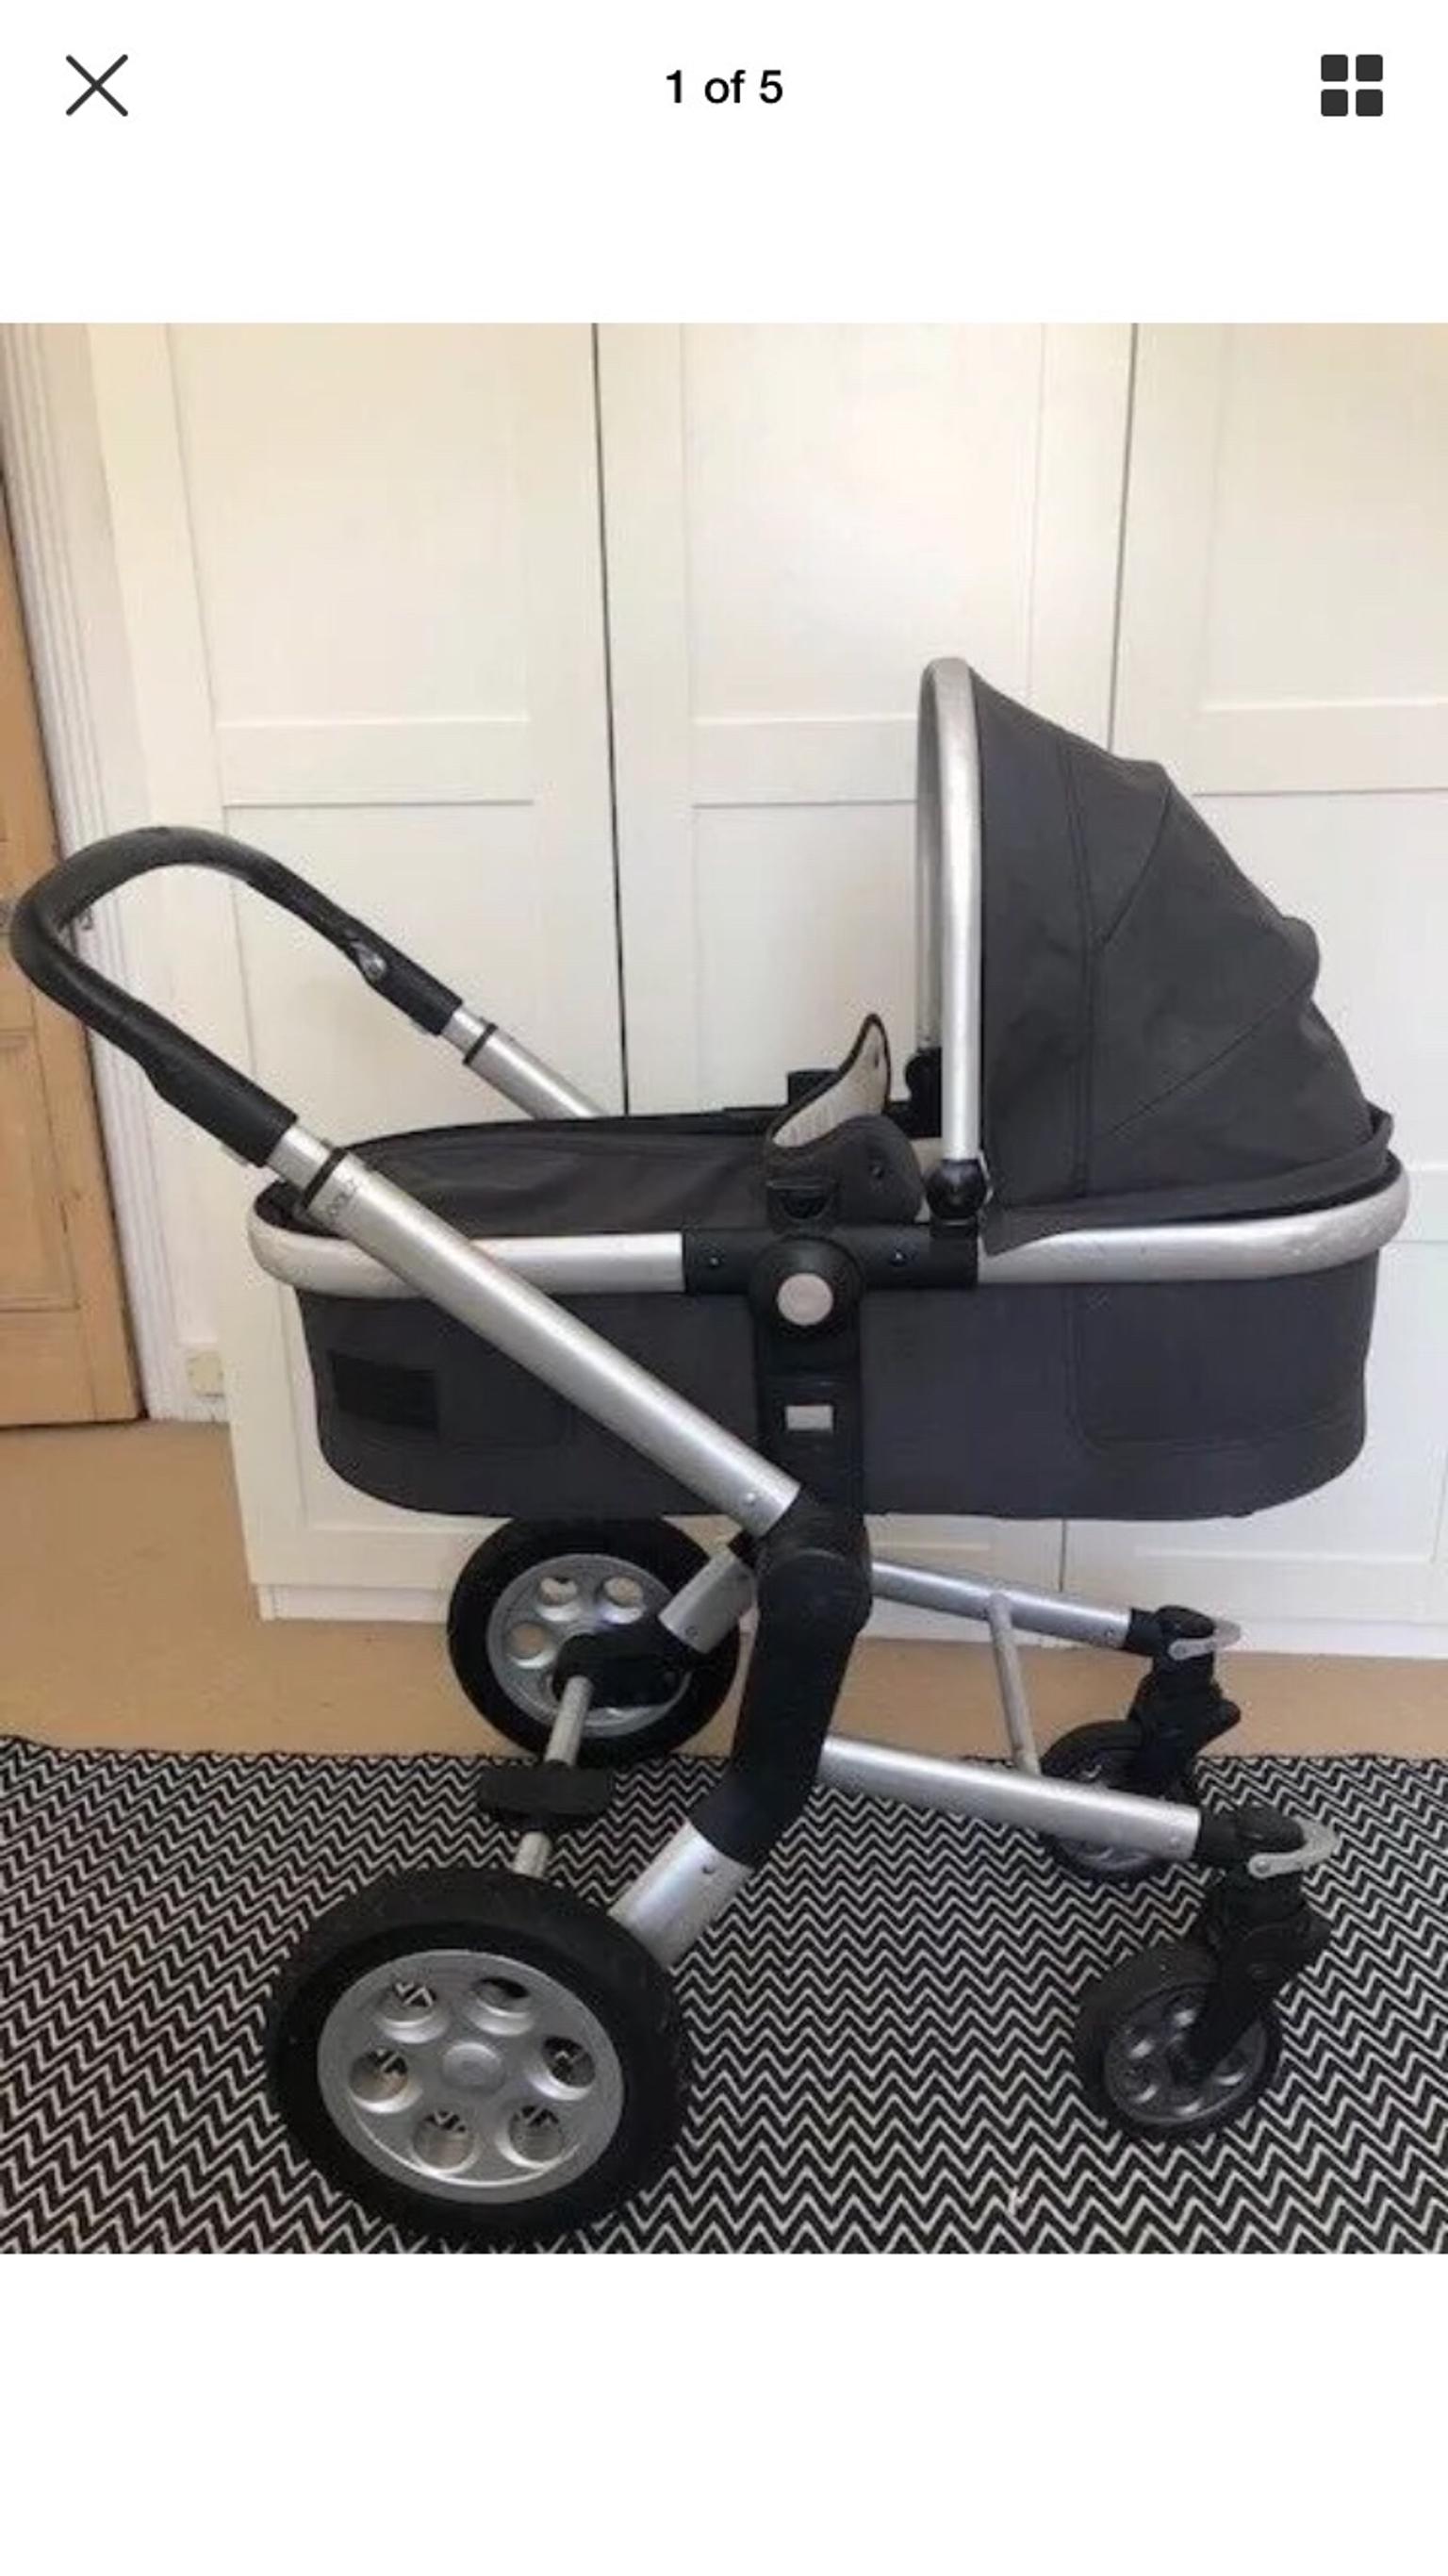 mothers choice ella stroller review